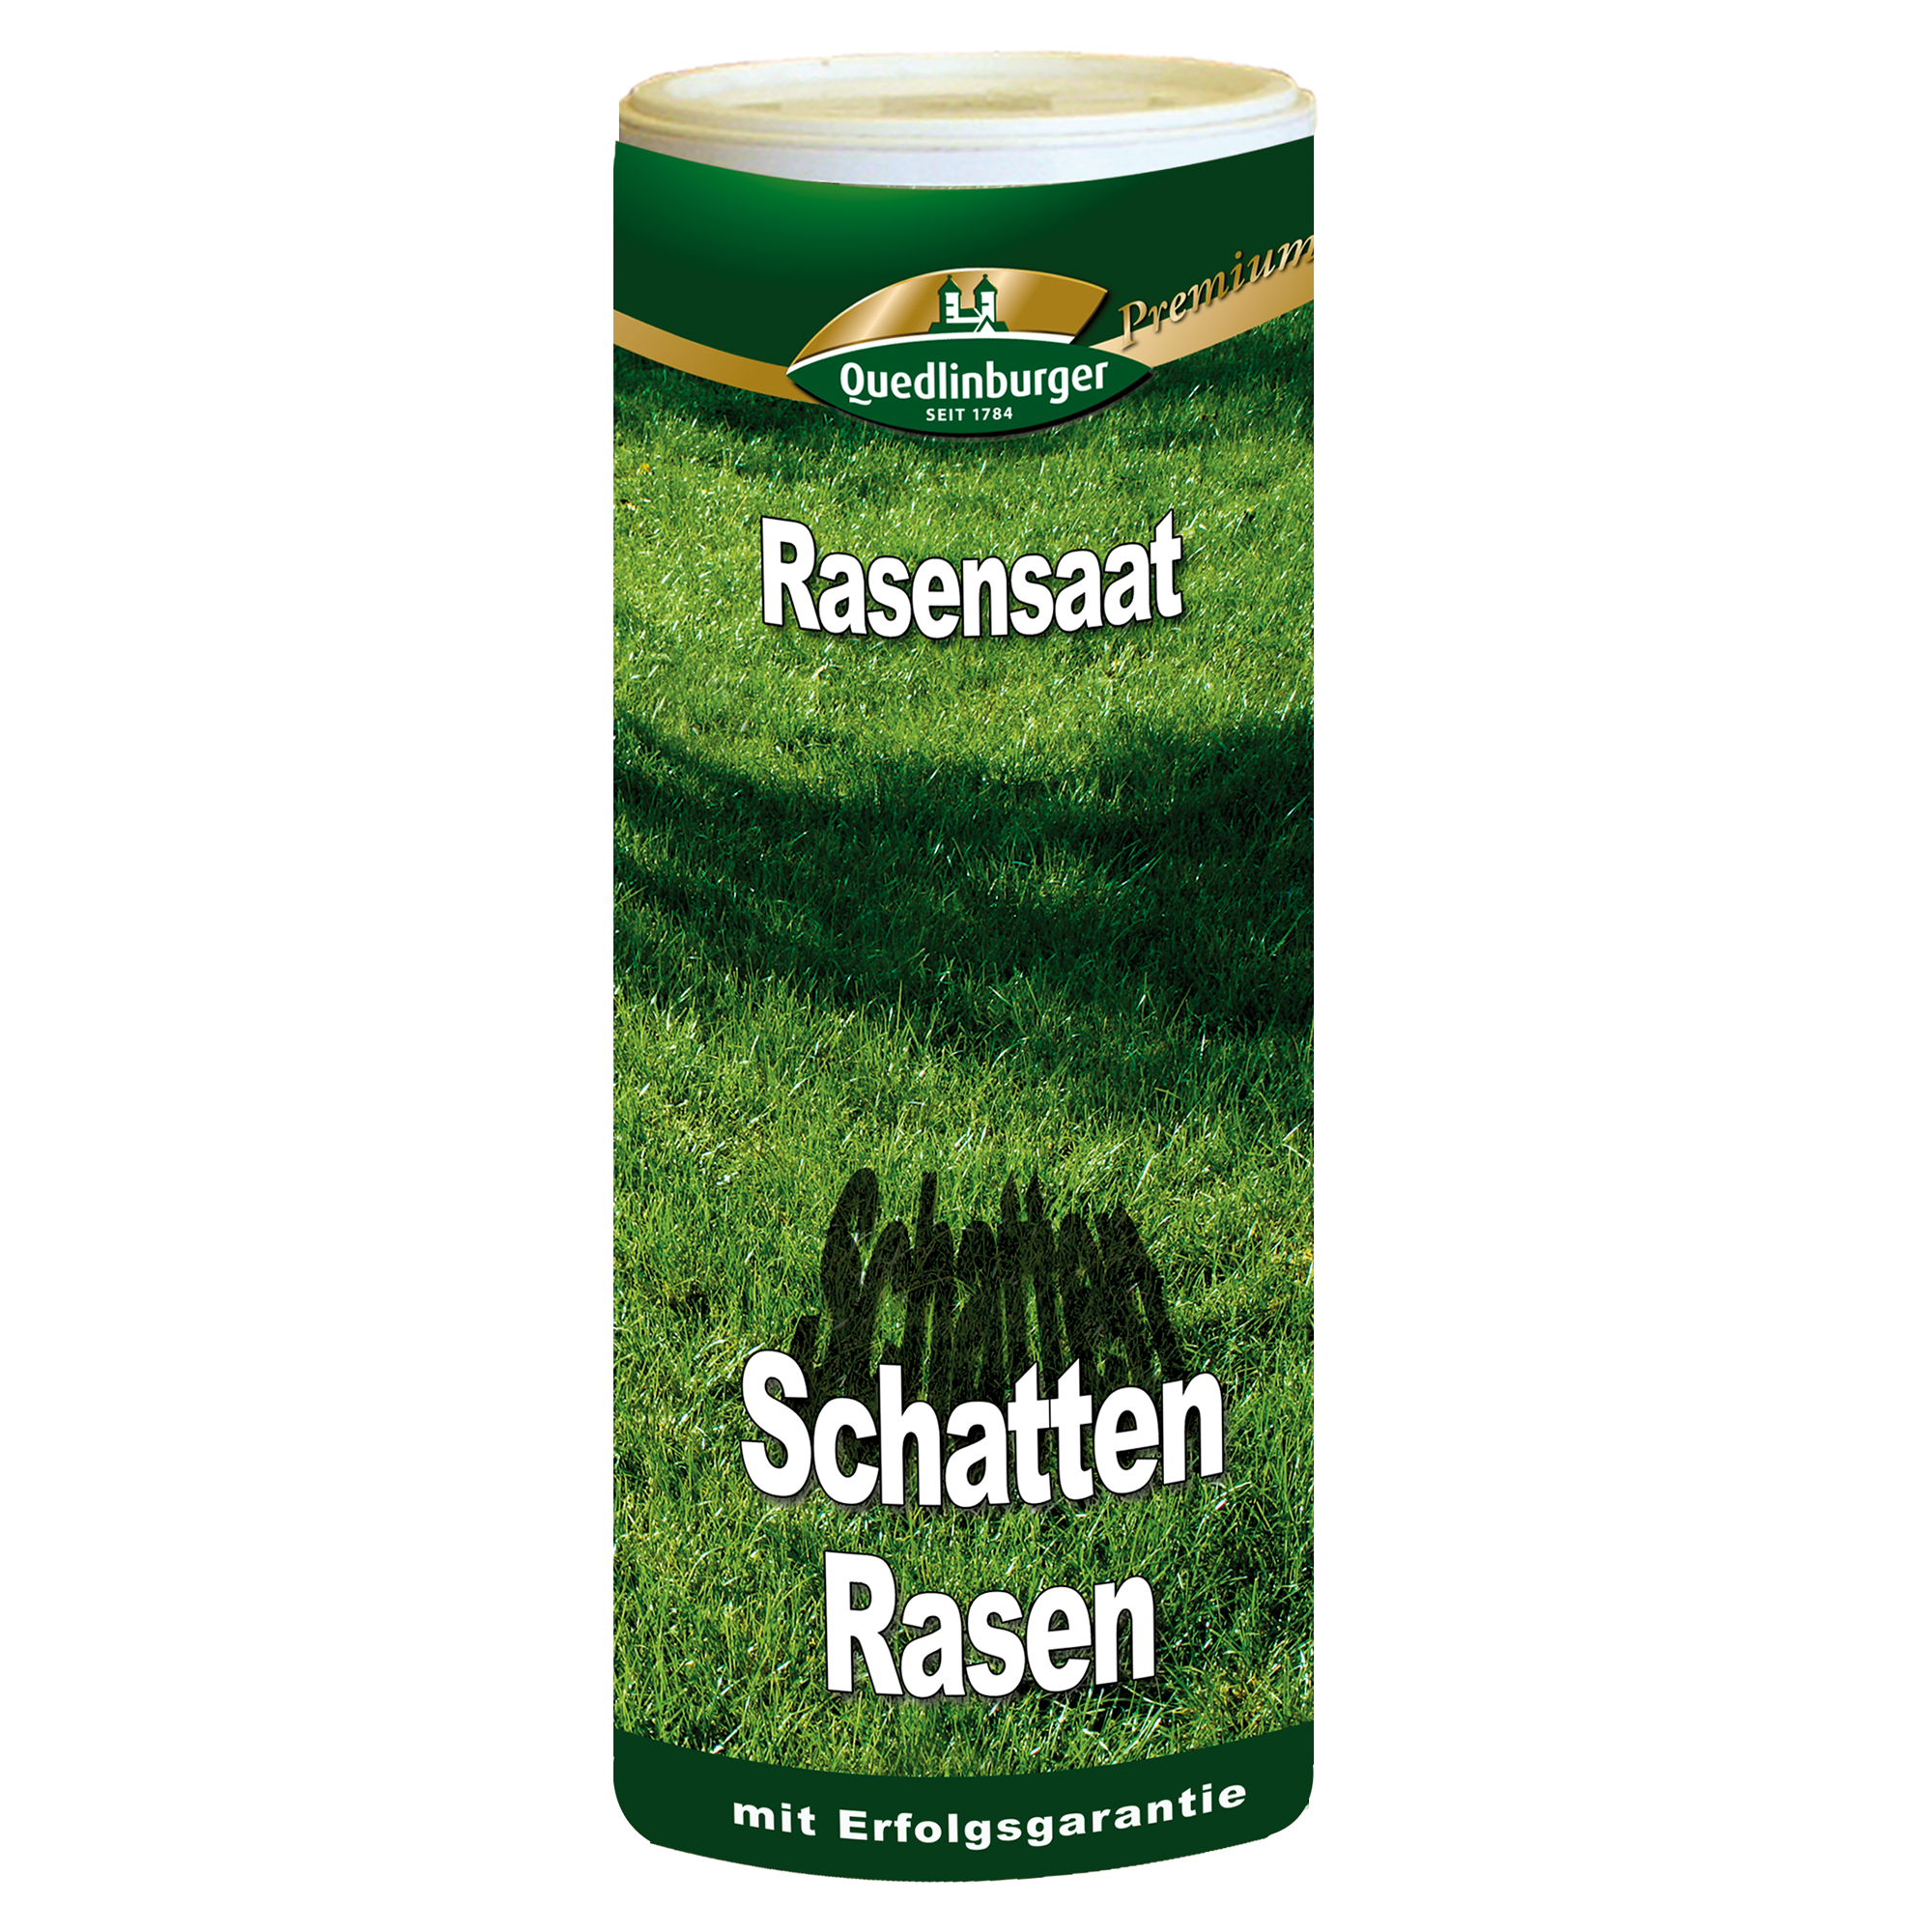 Schattenrasen 250 g + product picture